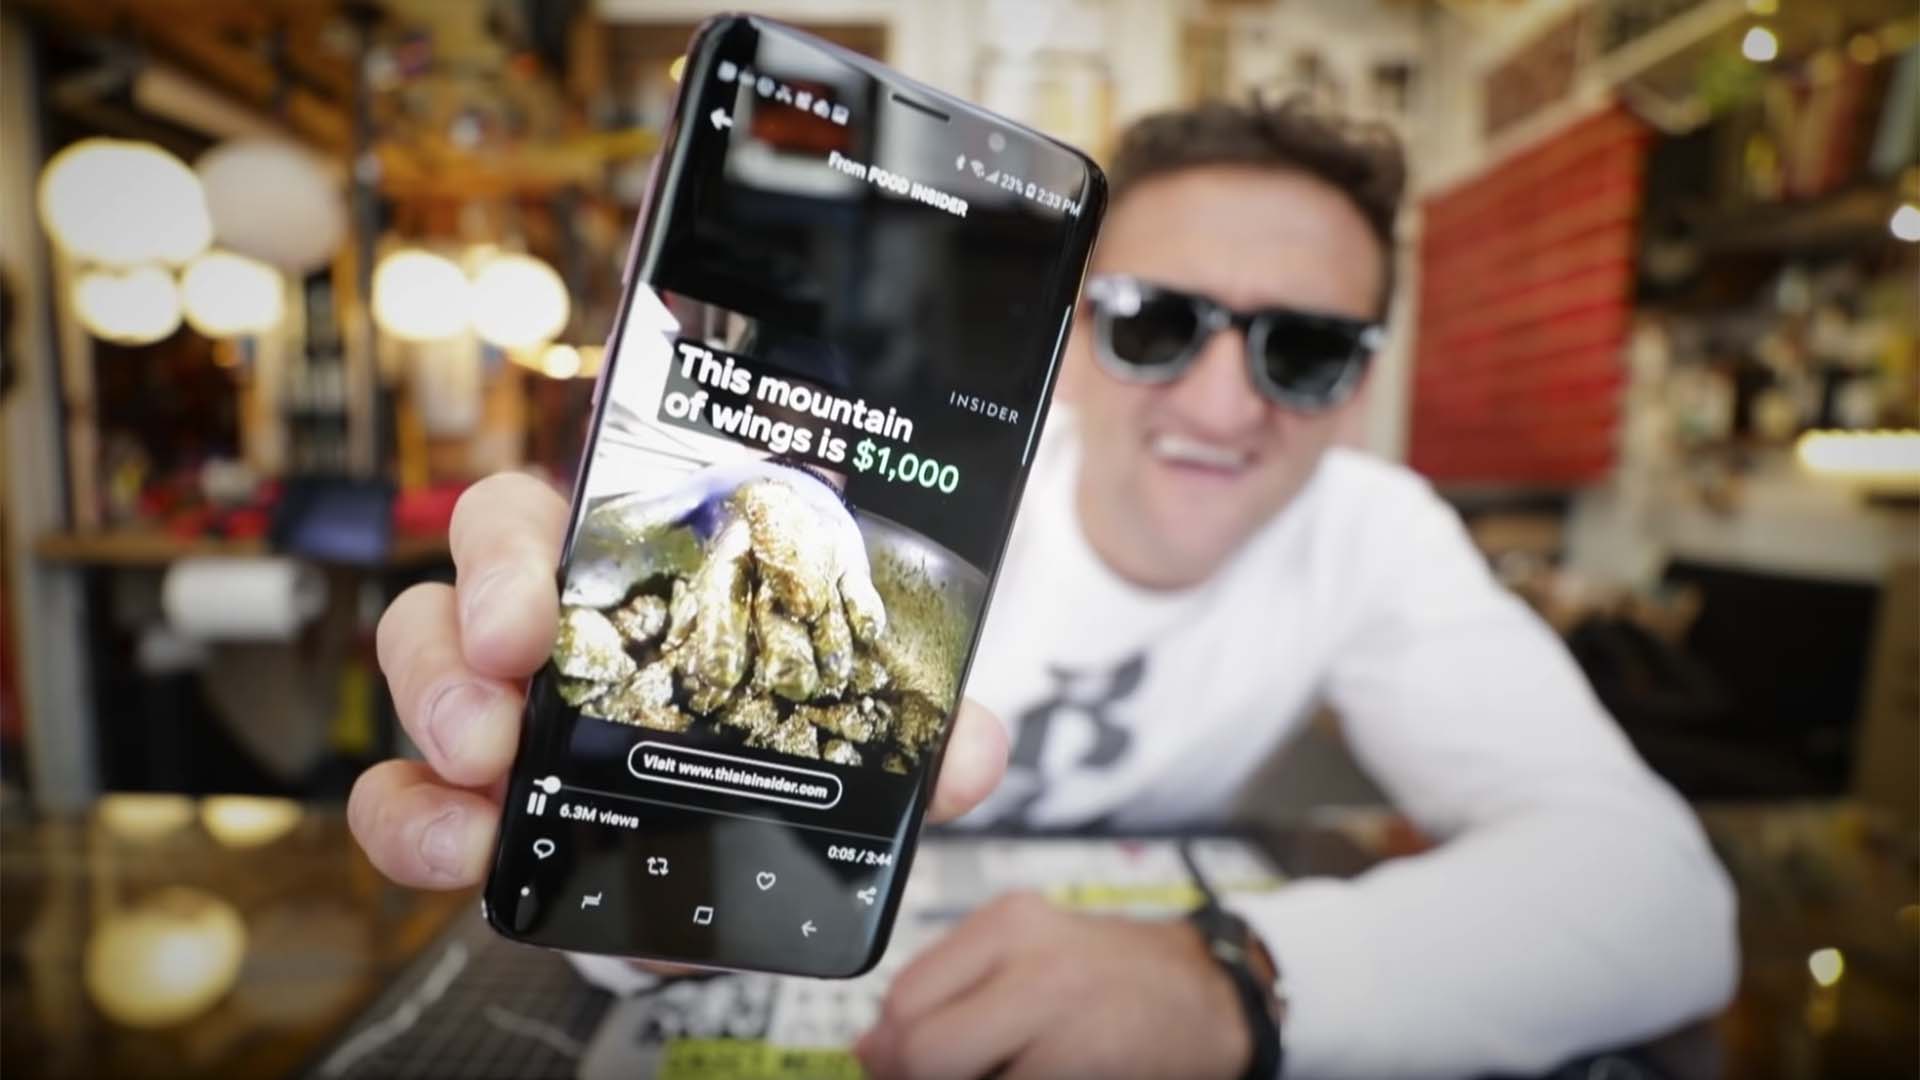 CASEY NEISTAT - NOT EVERYONE IS COPYING HIM - DAILY VLOGGER 